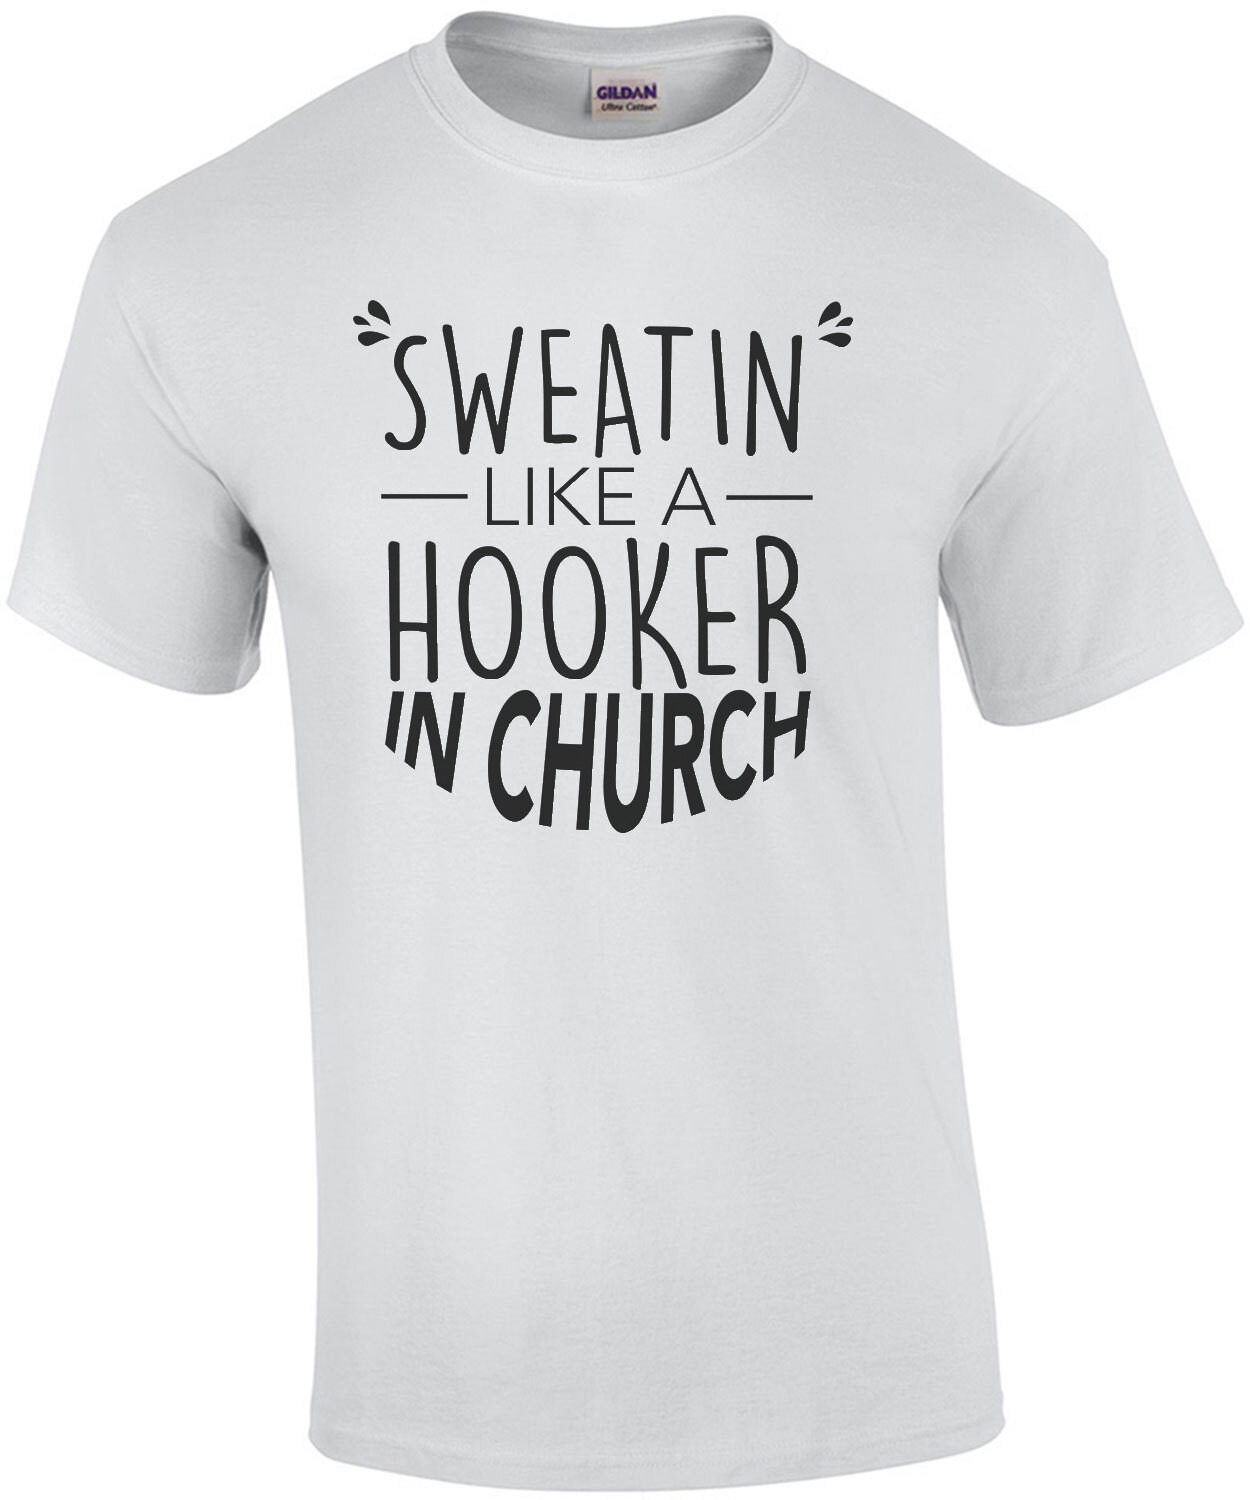 Sweatin like a hooker in church - funny work out t-shirt / exercise t-shirt